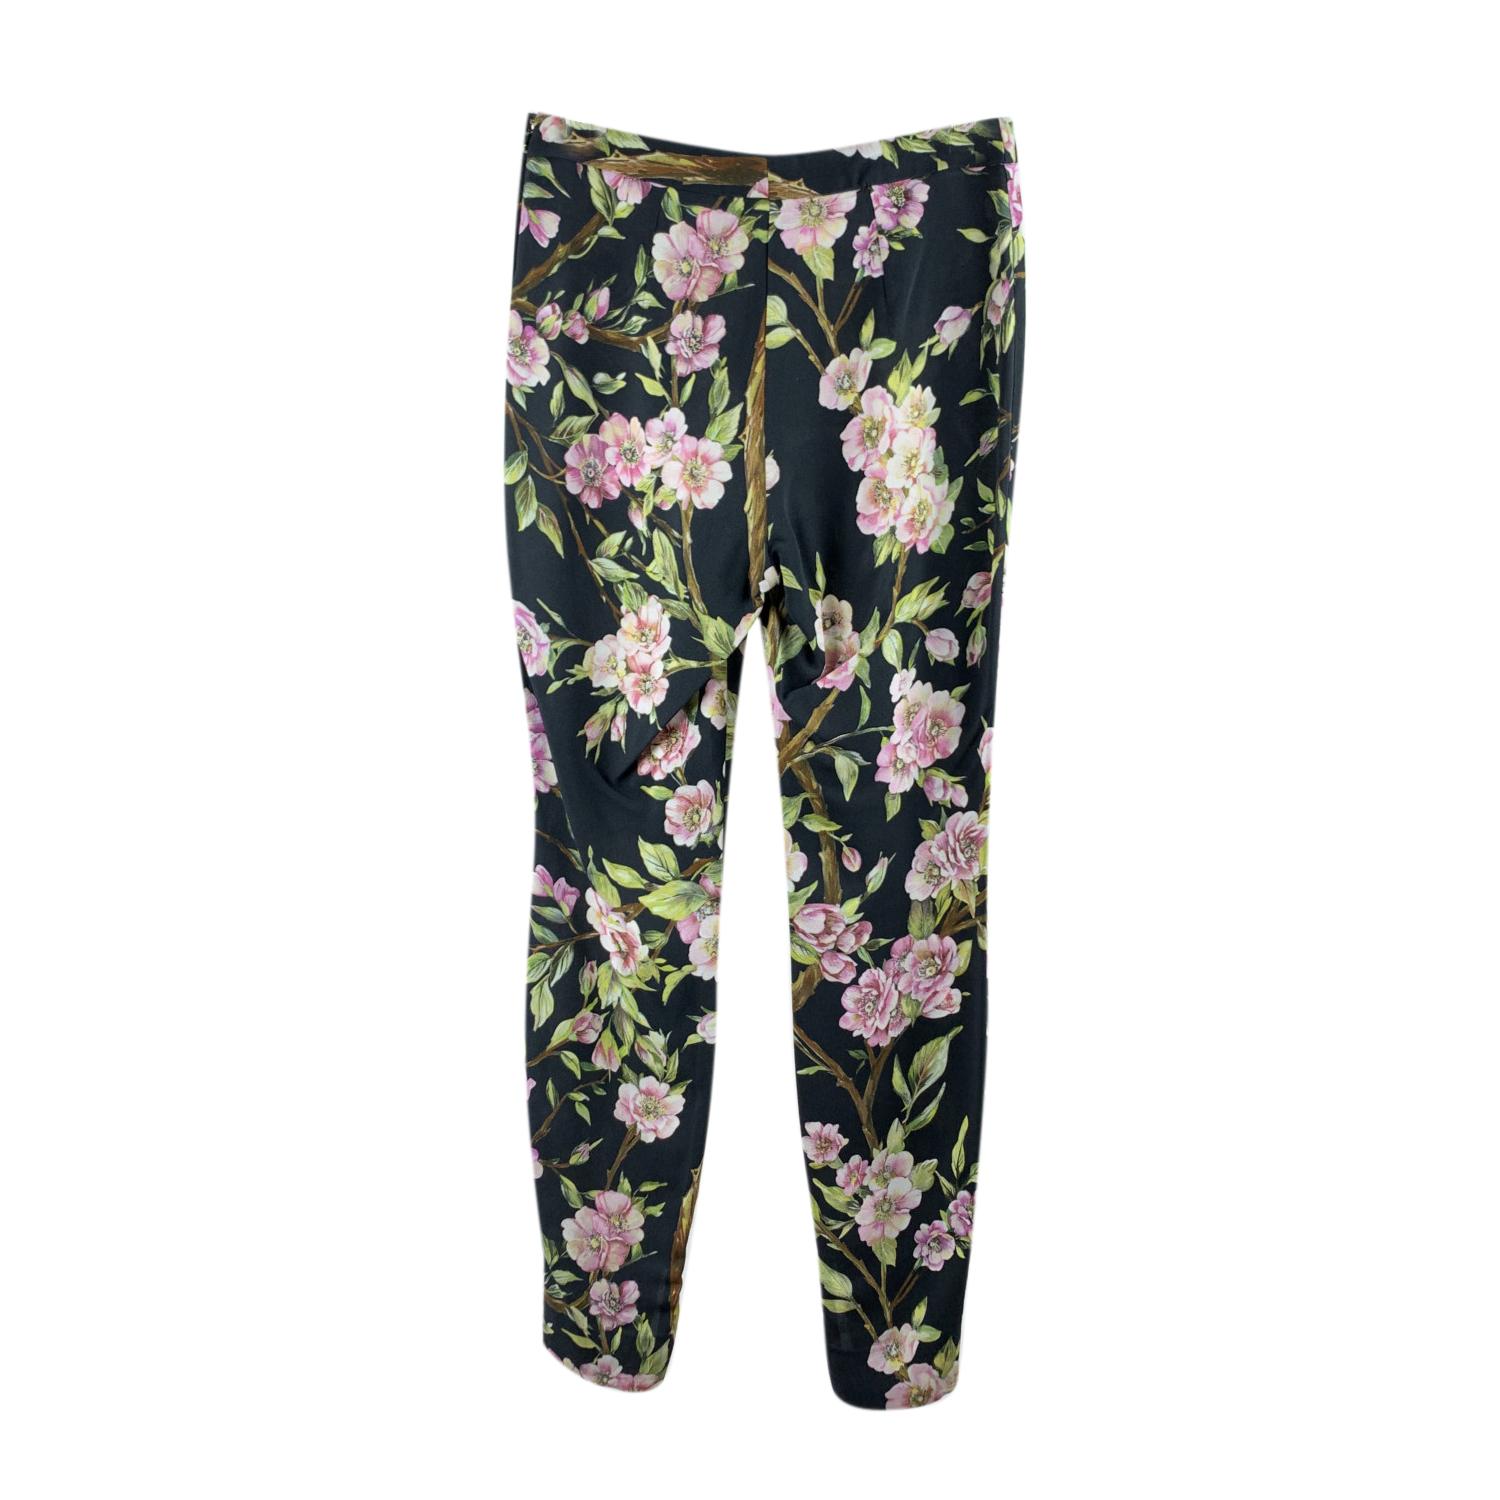 Dolce & Gabbana Floral Light Weight Fabric Pants with Zip detailing at the end of the leg. Composition tag is missing. Its is a light weight silky fabric. Size is not indicated. Estimated size is a SMALL size

Details

MATERIAL: Viscose

COLOR: